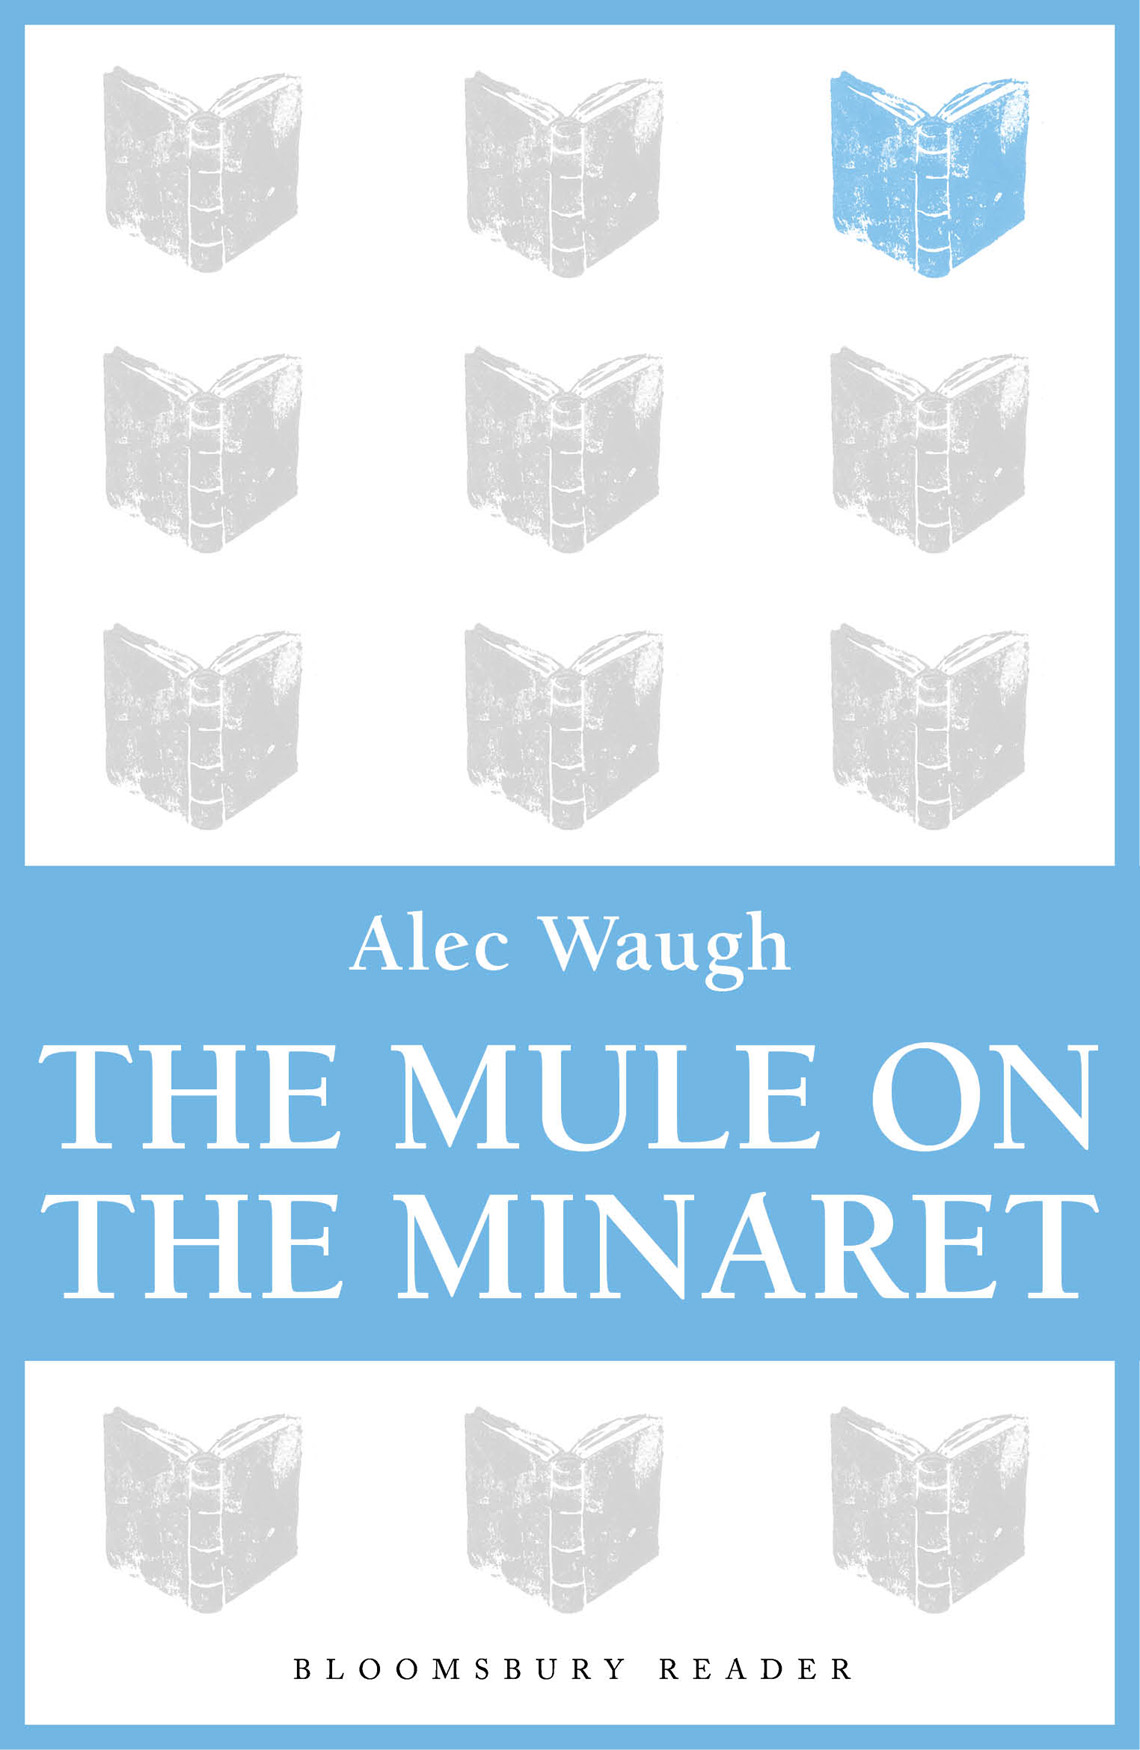 The Mule on the Minaret (1965) by Alec Waugh